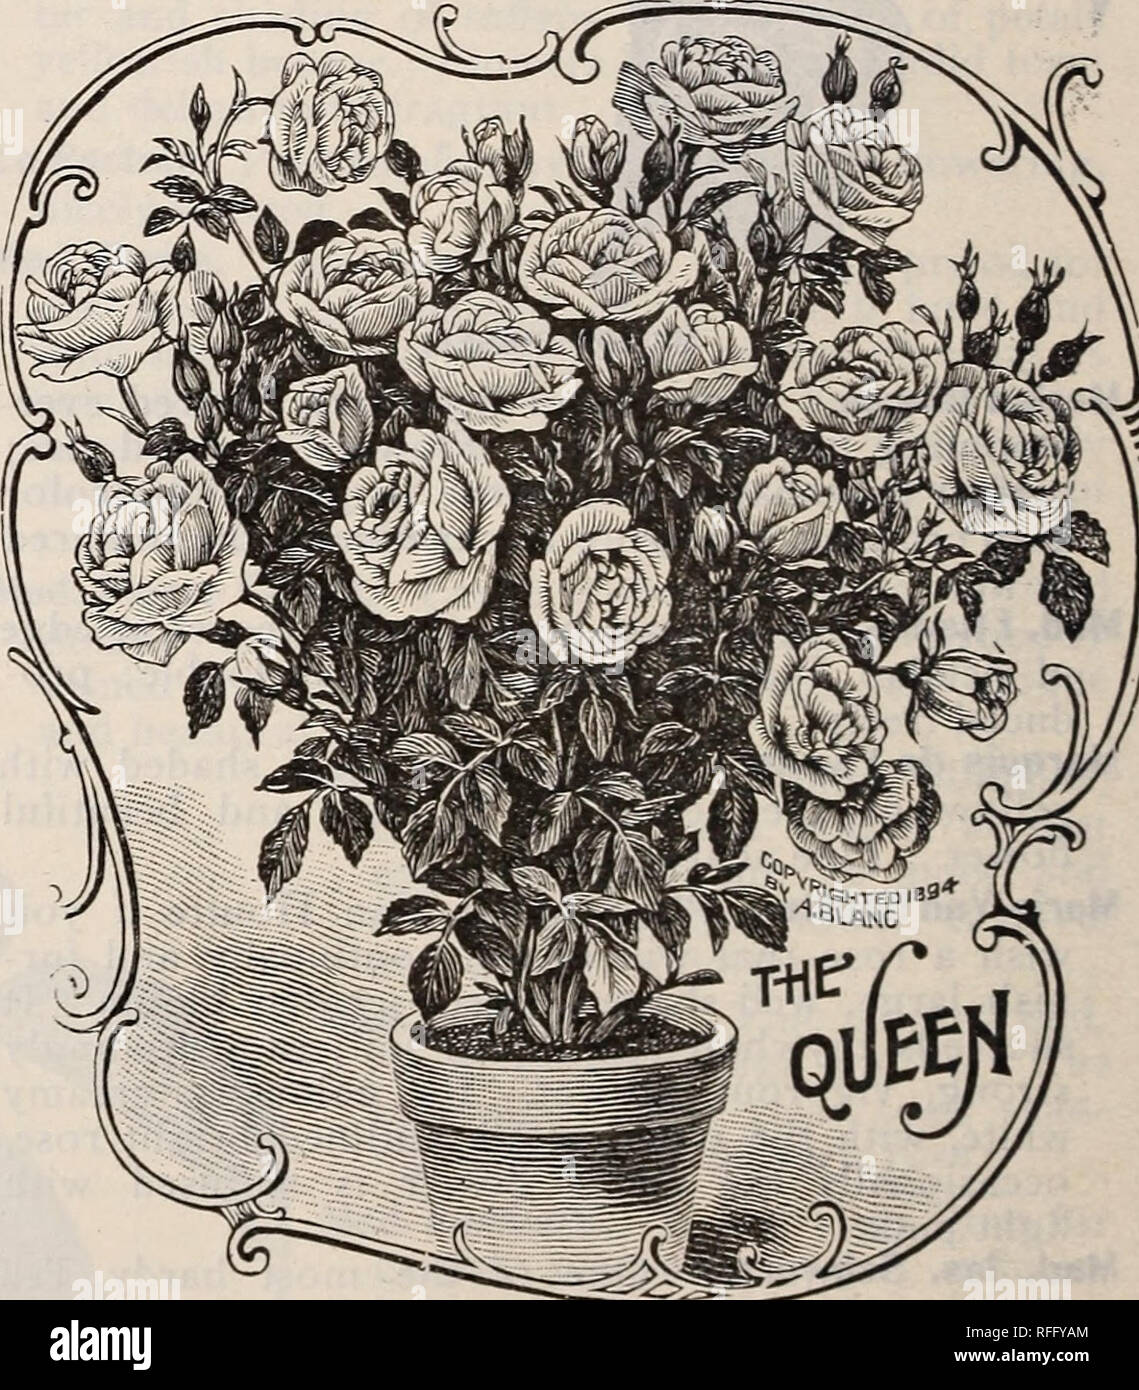 . Spring 1900. Nursery stock Ohio Painesville Catalogs; Vegetables Seeds Catalogs; Flowers Catalogs; Bulbs (Plants) Catalogs; Plants, Ornamental Catalogs; Fruit trees Seedlings Catalogs; Fruit Catalogs. Papa Gontier. An excellent crimson Tea, and one of the best for all purposes. It has a perfect shaped 1 bud on good length of stem, making it desirable for cut flowers, and when planted outside the flow- ers open up nicely and are of an attractive carmine crimson; should be included in every collection of Roses. Princess Bonnie. One of the finest dark colored Tea Roses. Very nearly hardy in mos Stock Photo